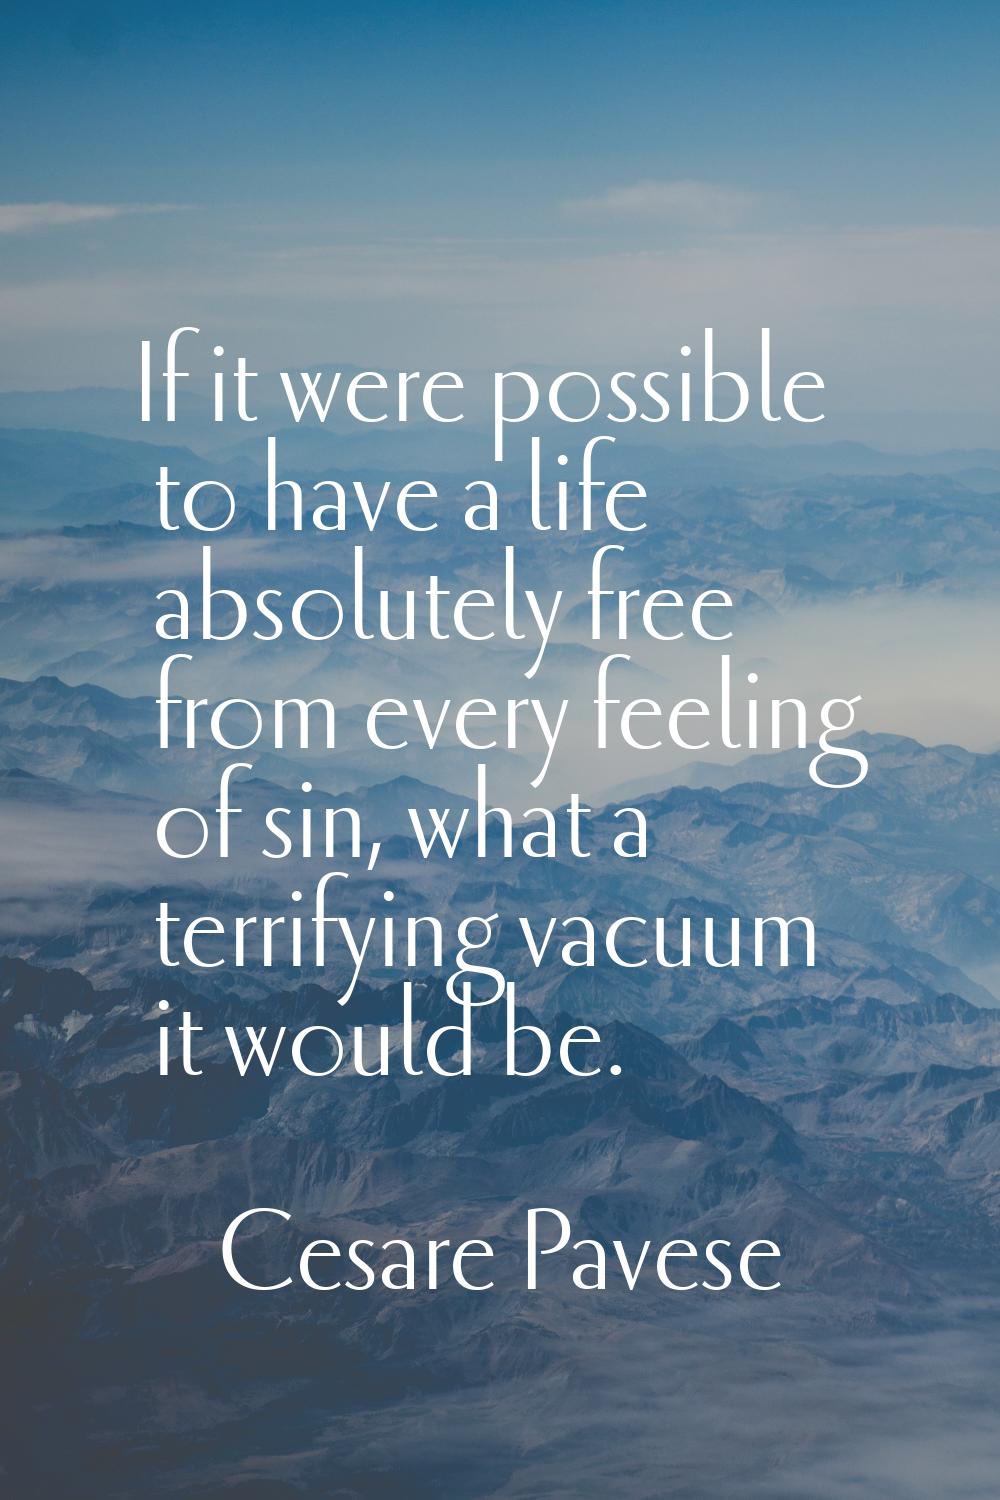 If it were possible to have a life absolutely free from every feeling of sin, what a terrifying vac